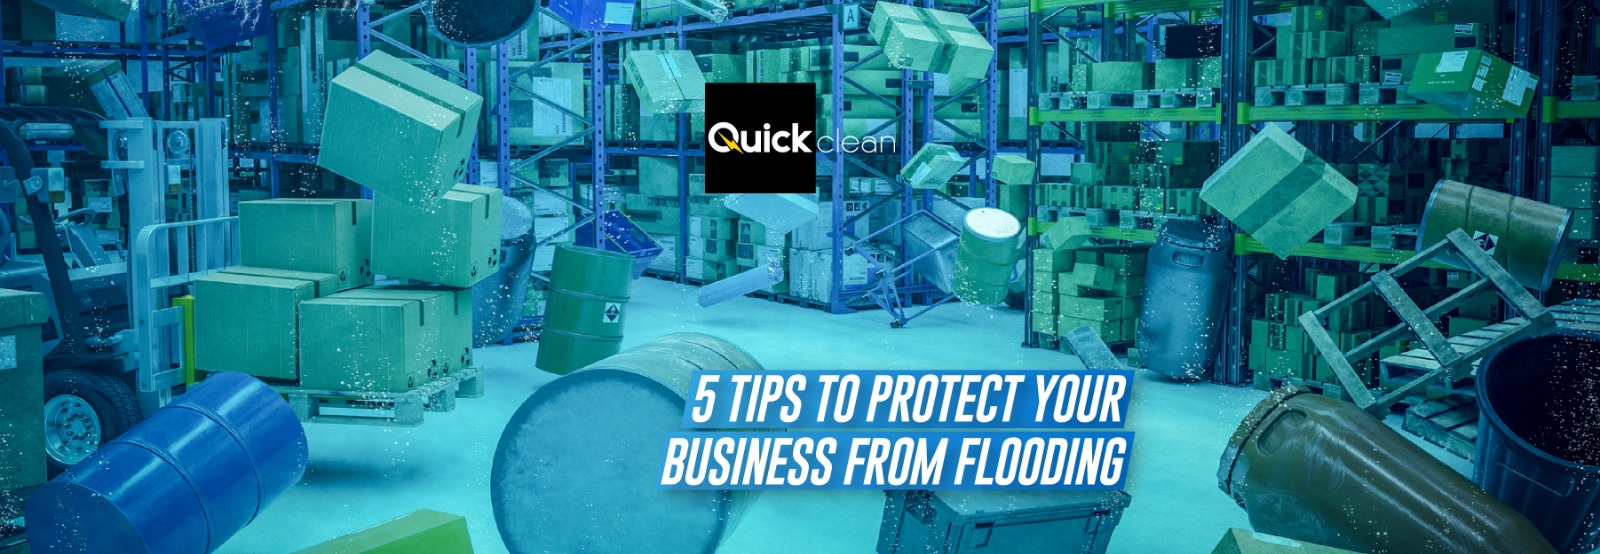 5 tips to protect your business and storm drain from flooding